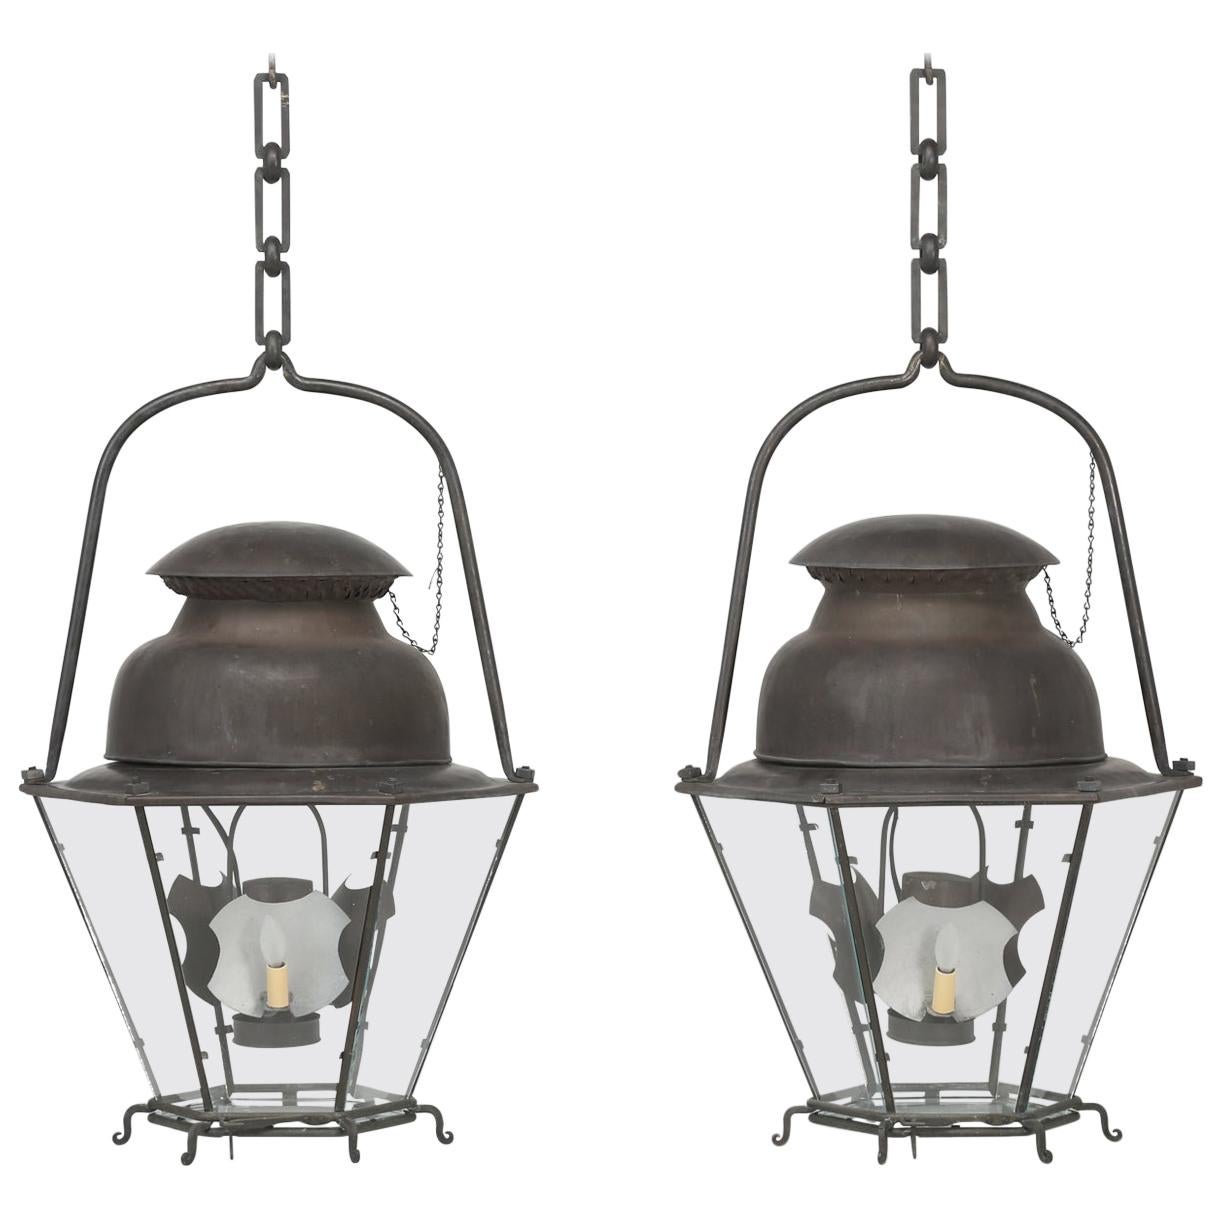 French 18th Century Style Copper Lanterns from the Original French Blueprints